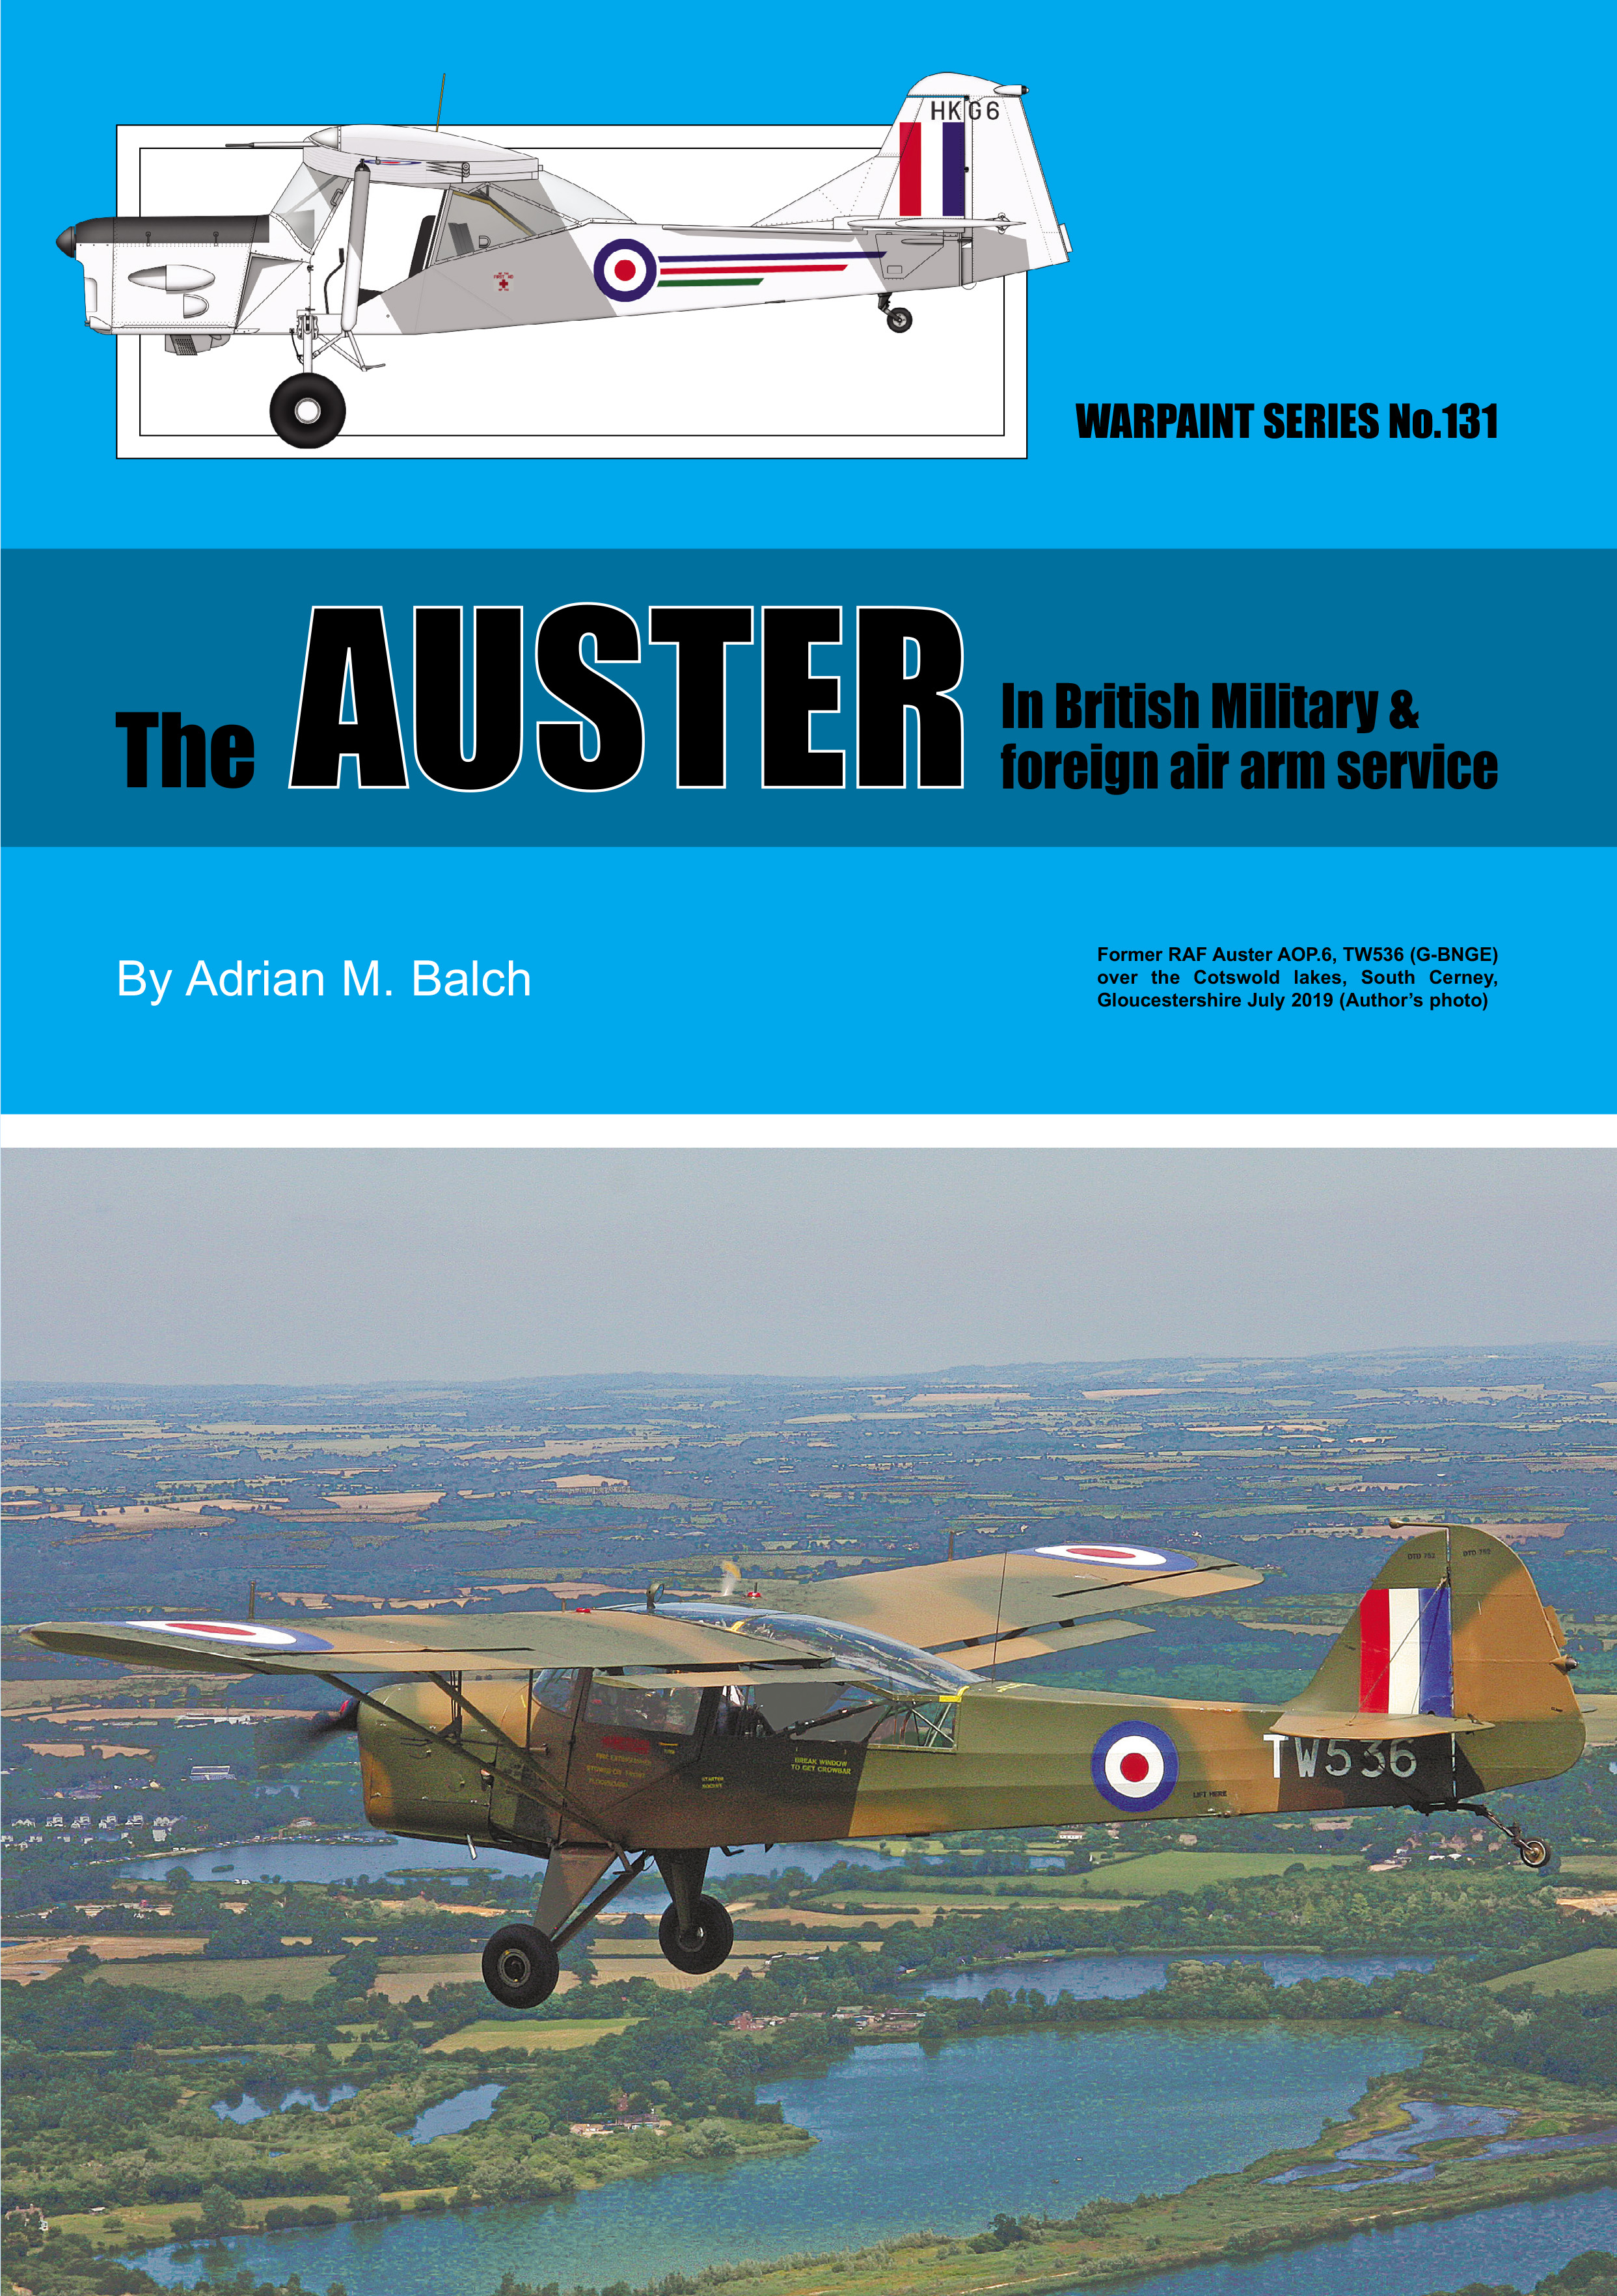 Guideline Publications Warpaint 131 - The AUSTER In British Military & foreign air arm service 